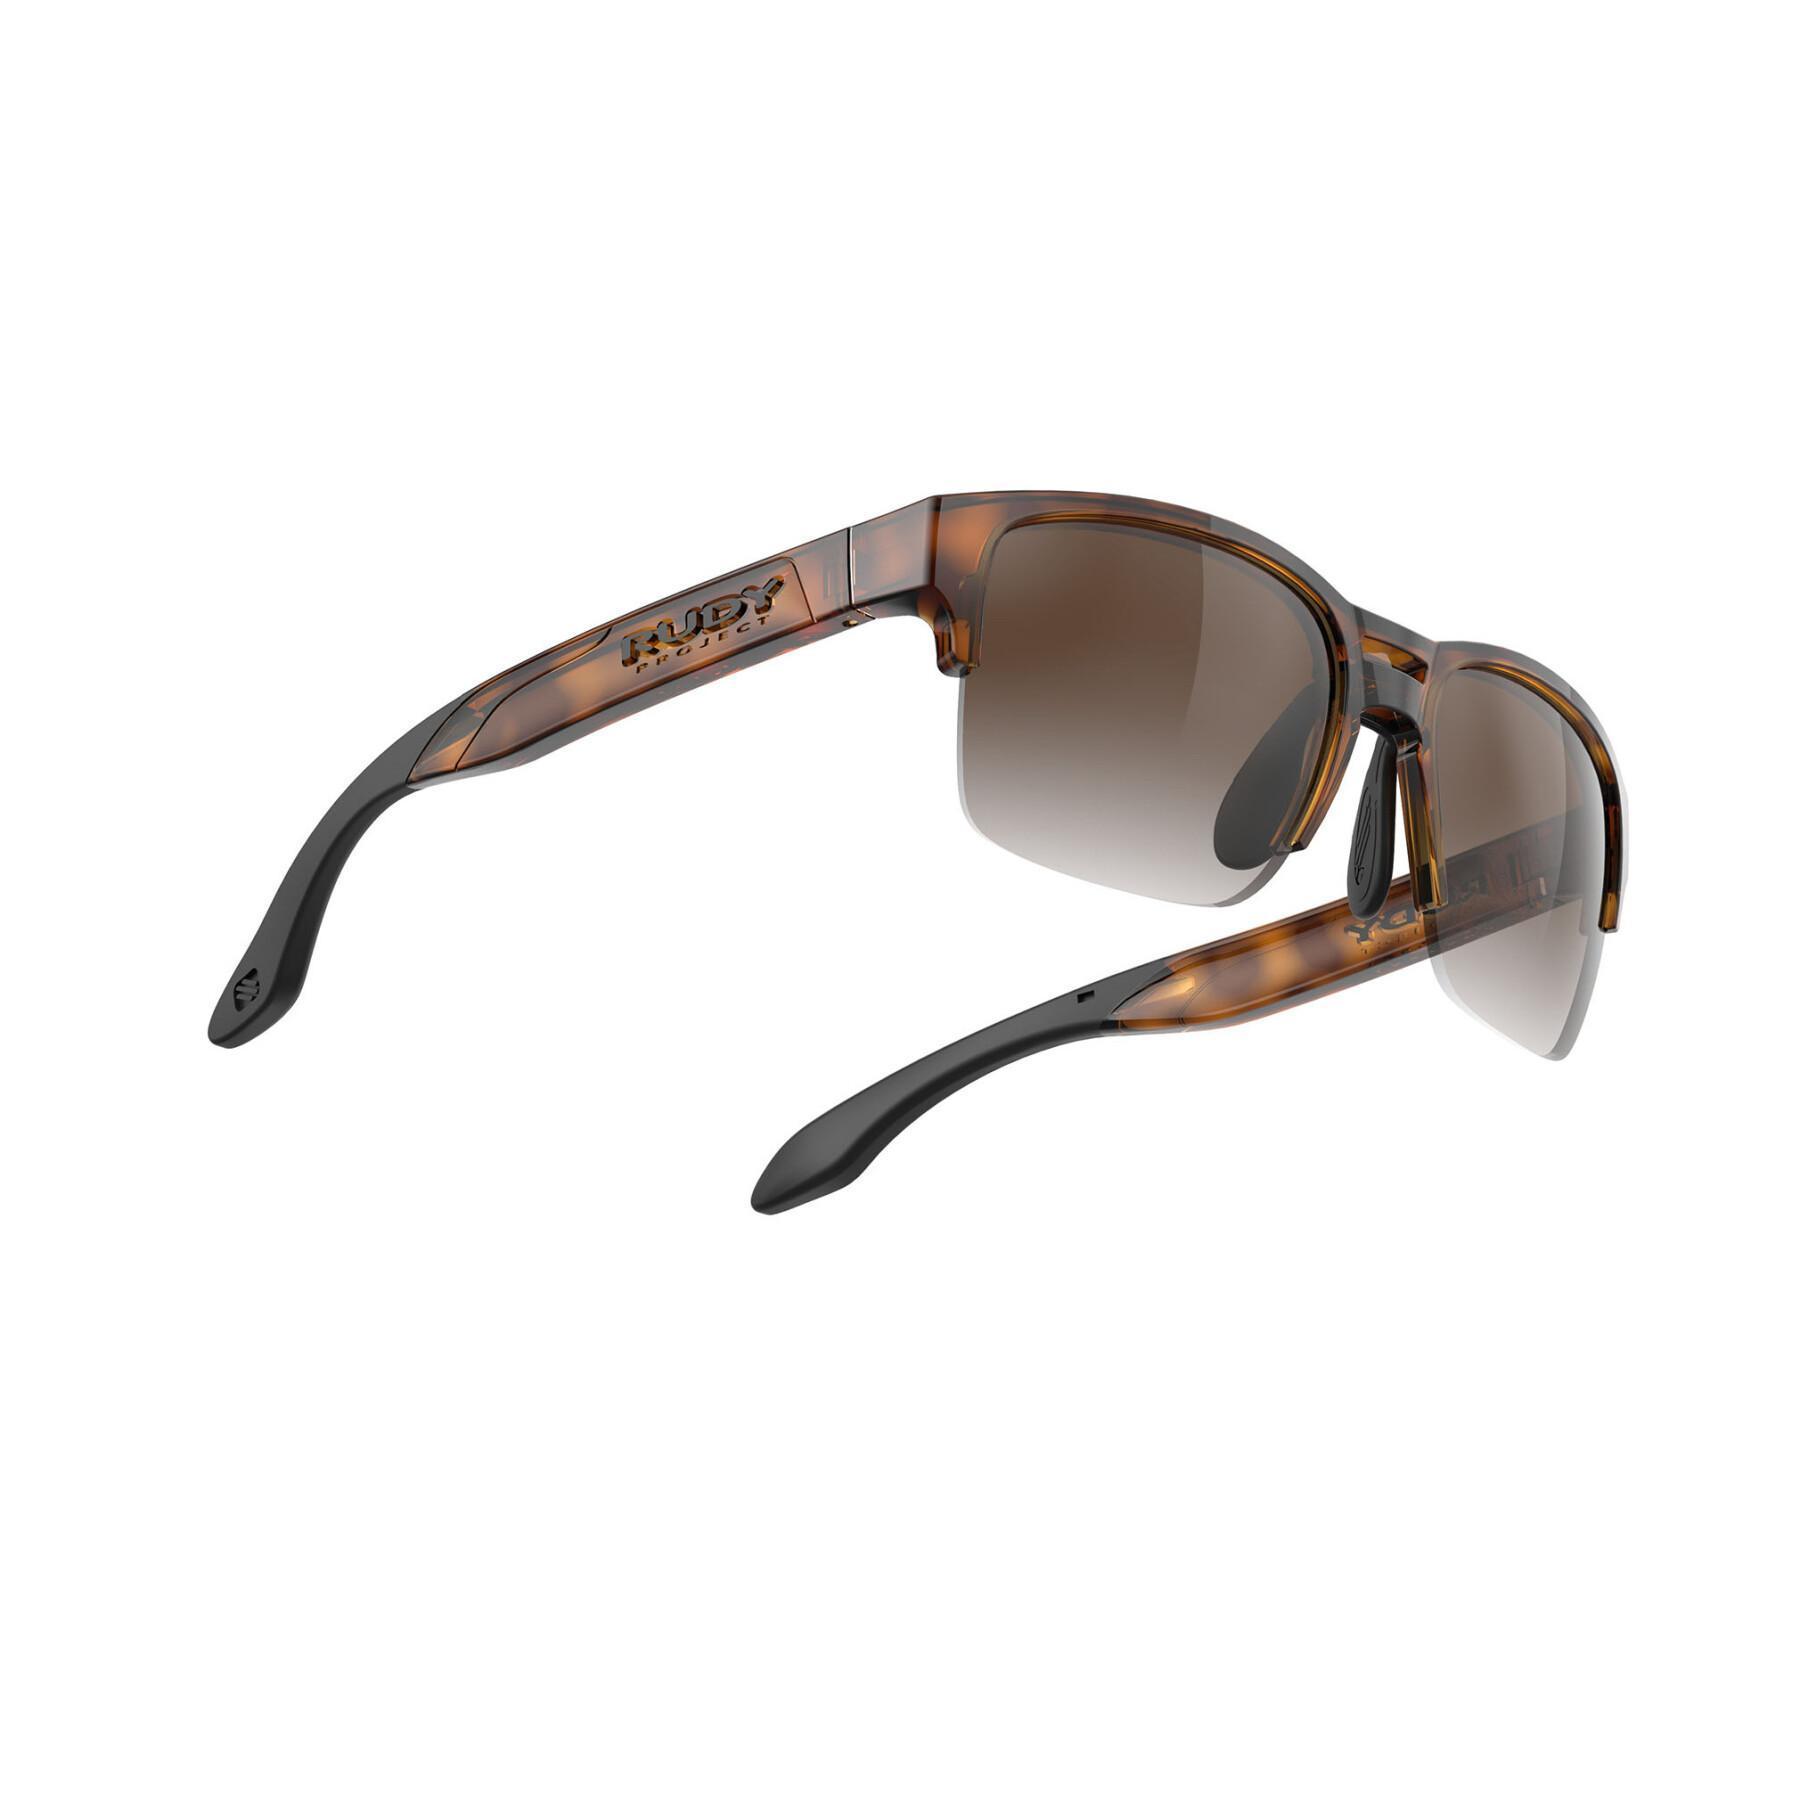 Sunglasses Rudy Project spinair 58